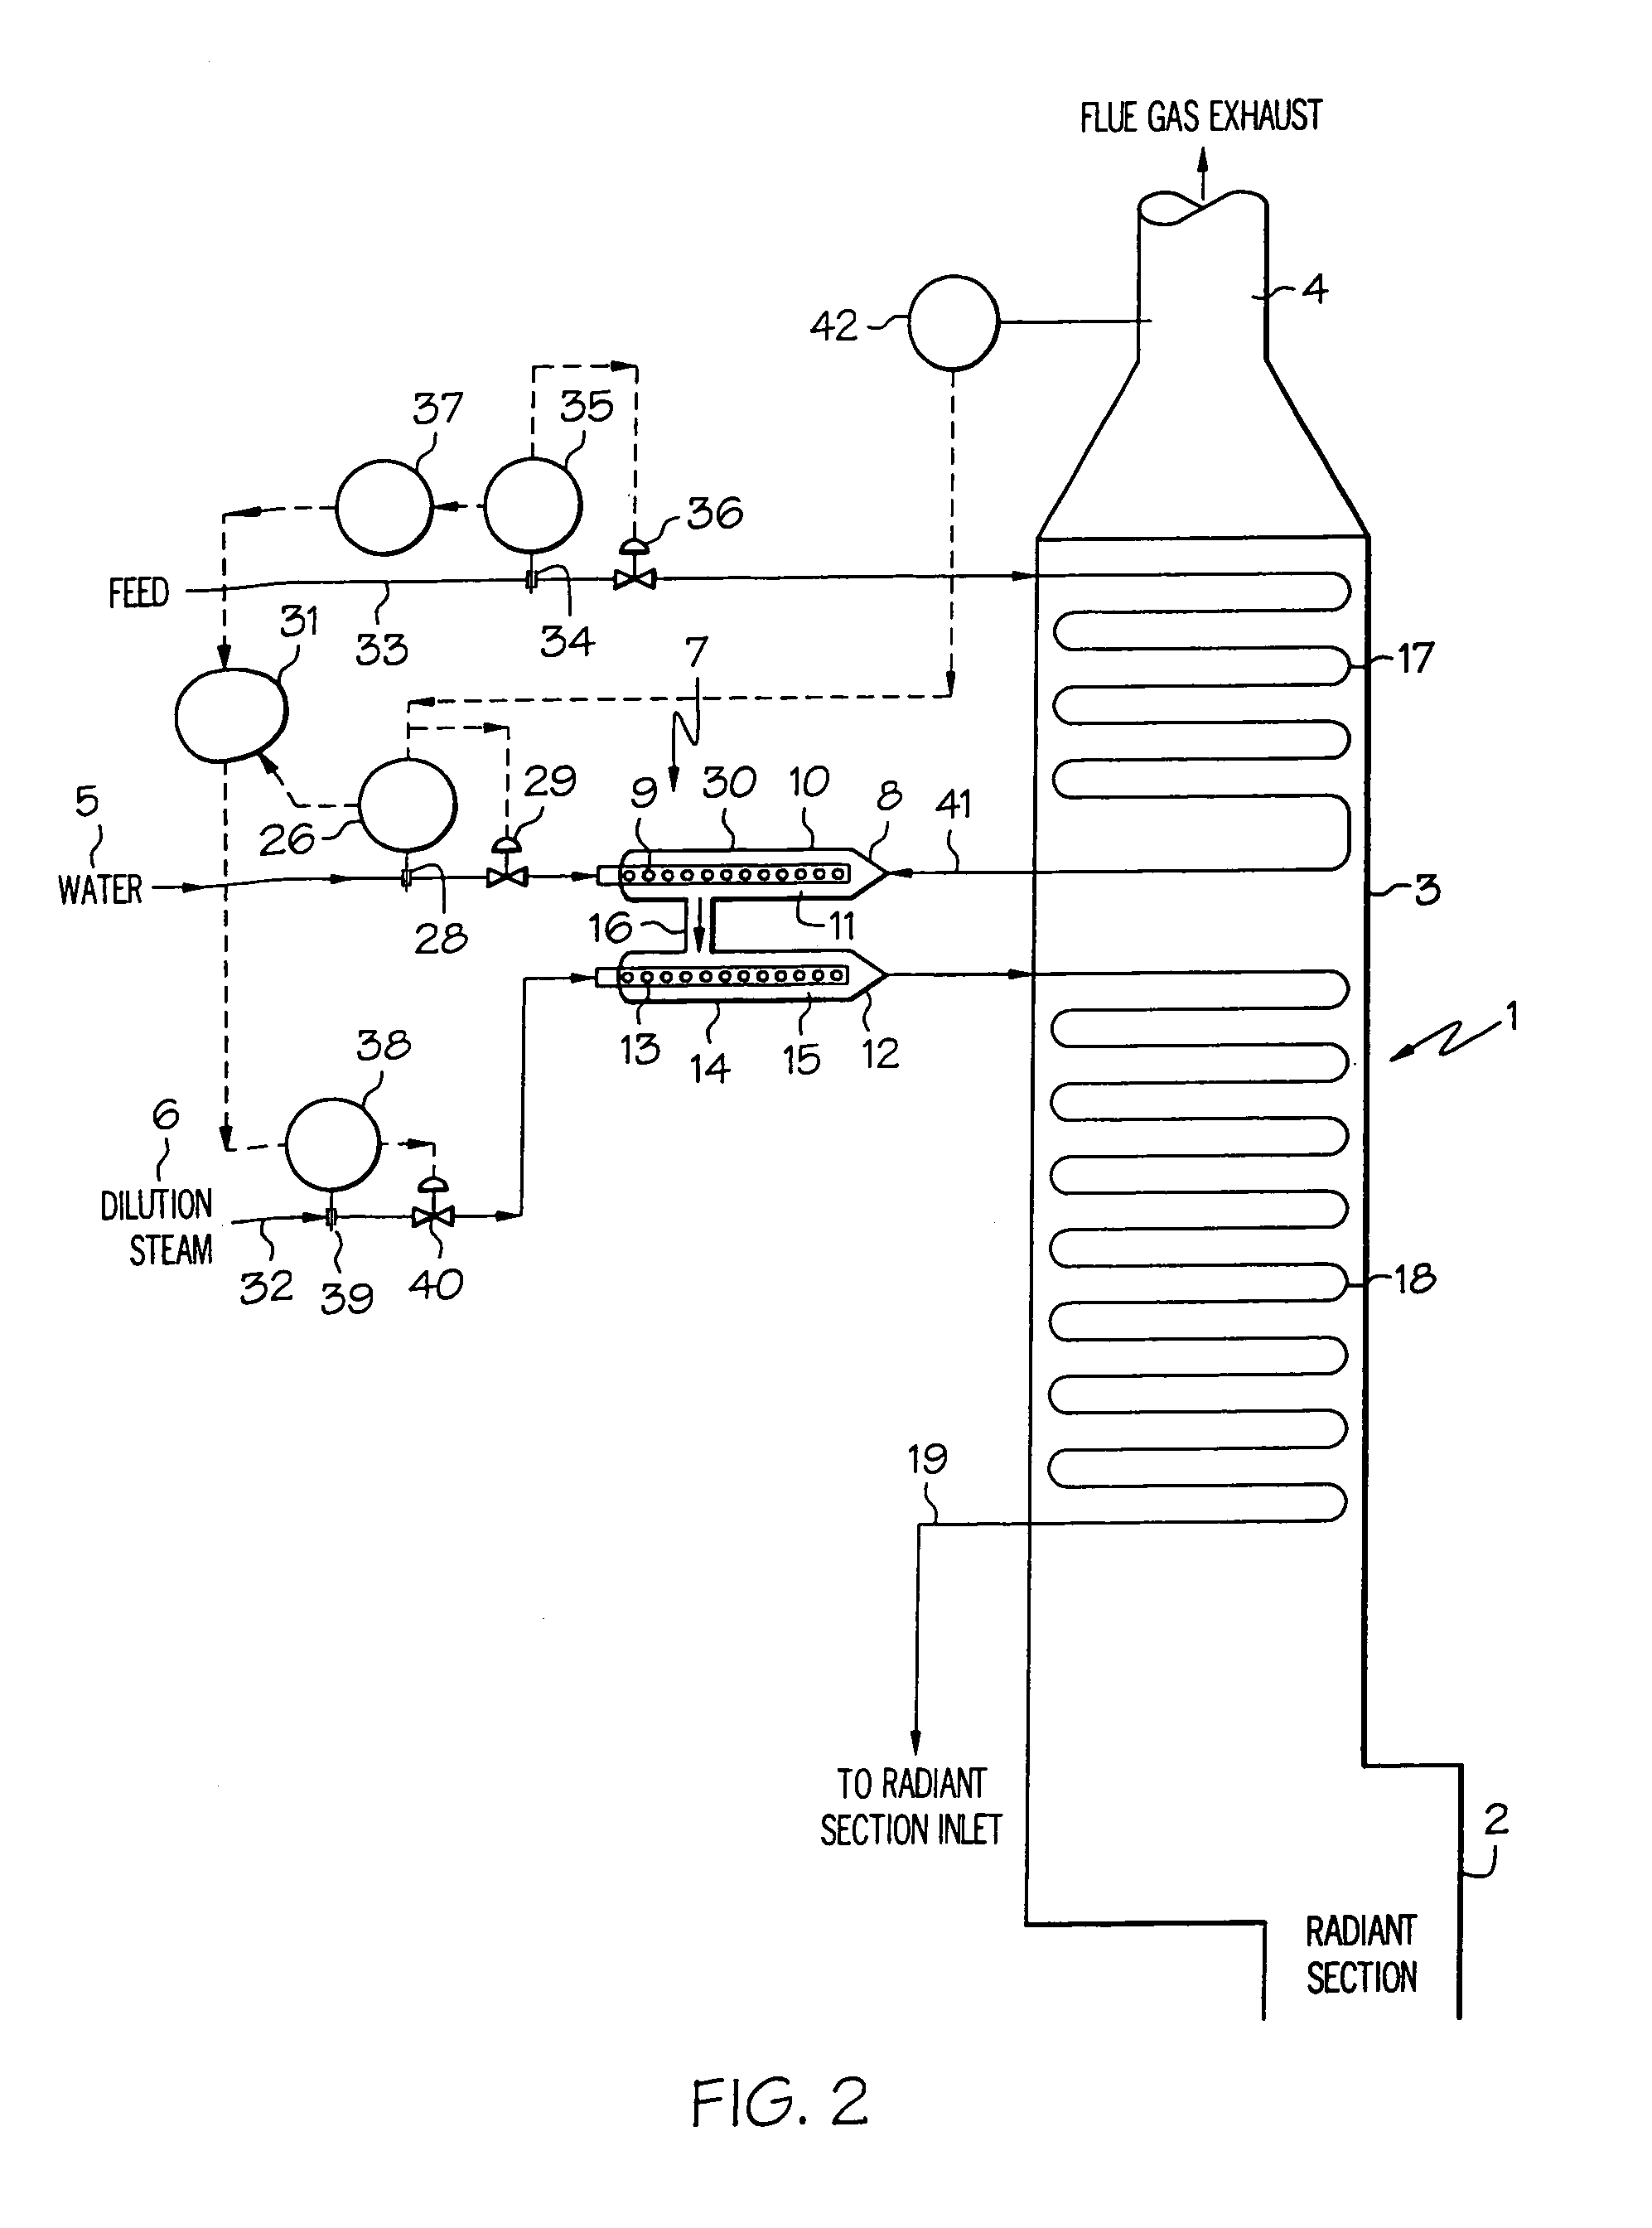 Process for cracking hydrocarbon feed with water substitution